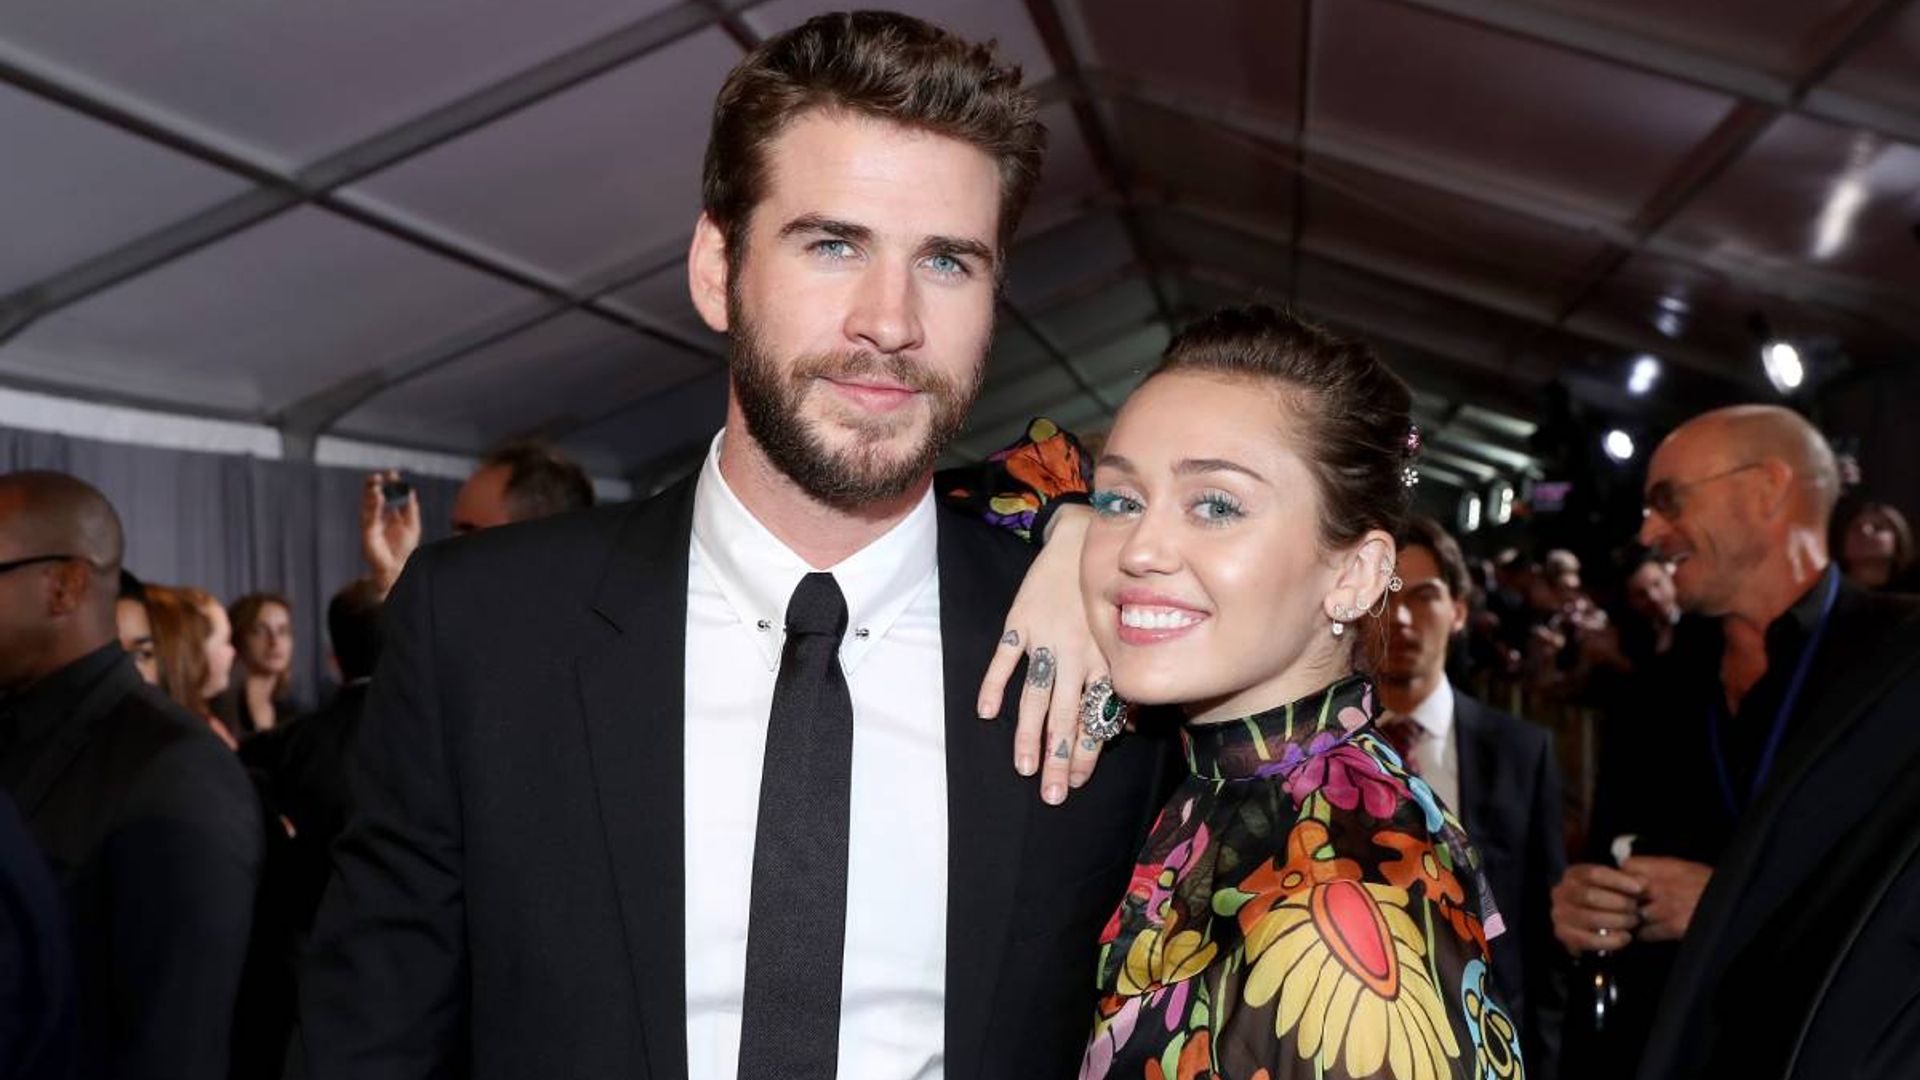 Liam Hemsworth breaks silence on split from Miley Cyrus – and warns about false reports